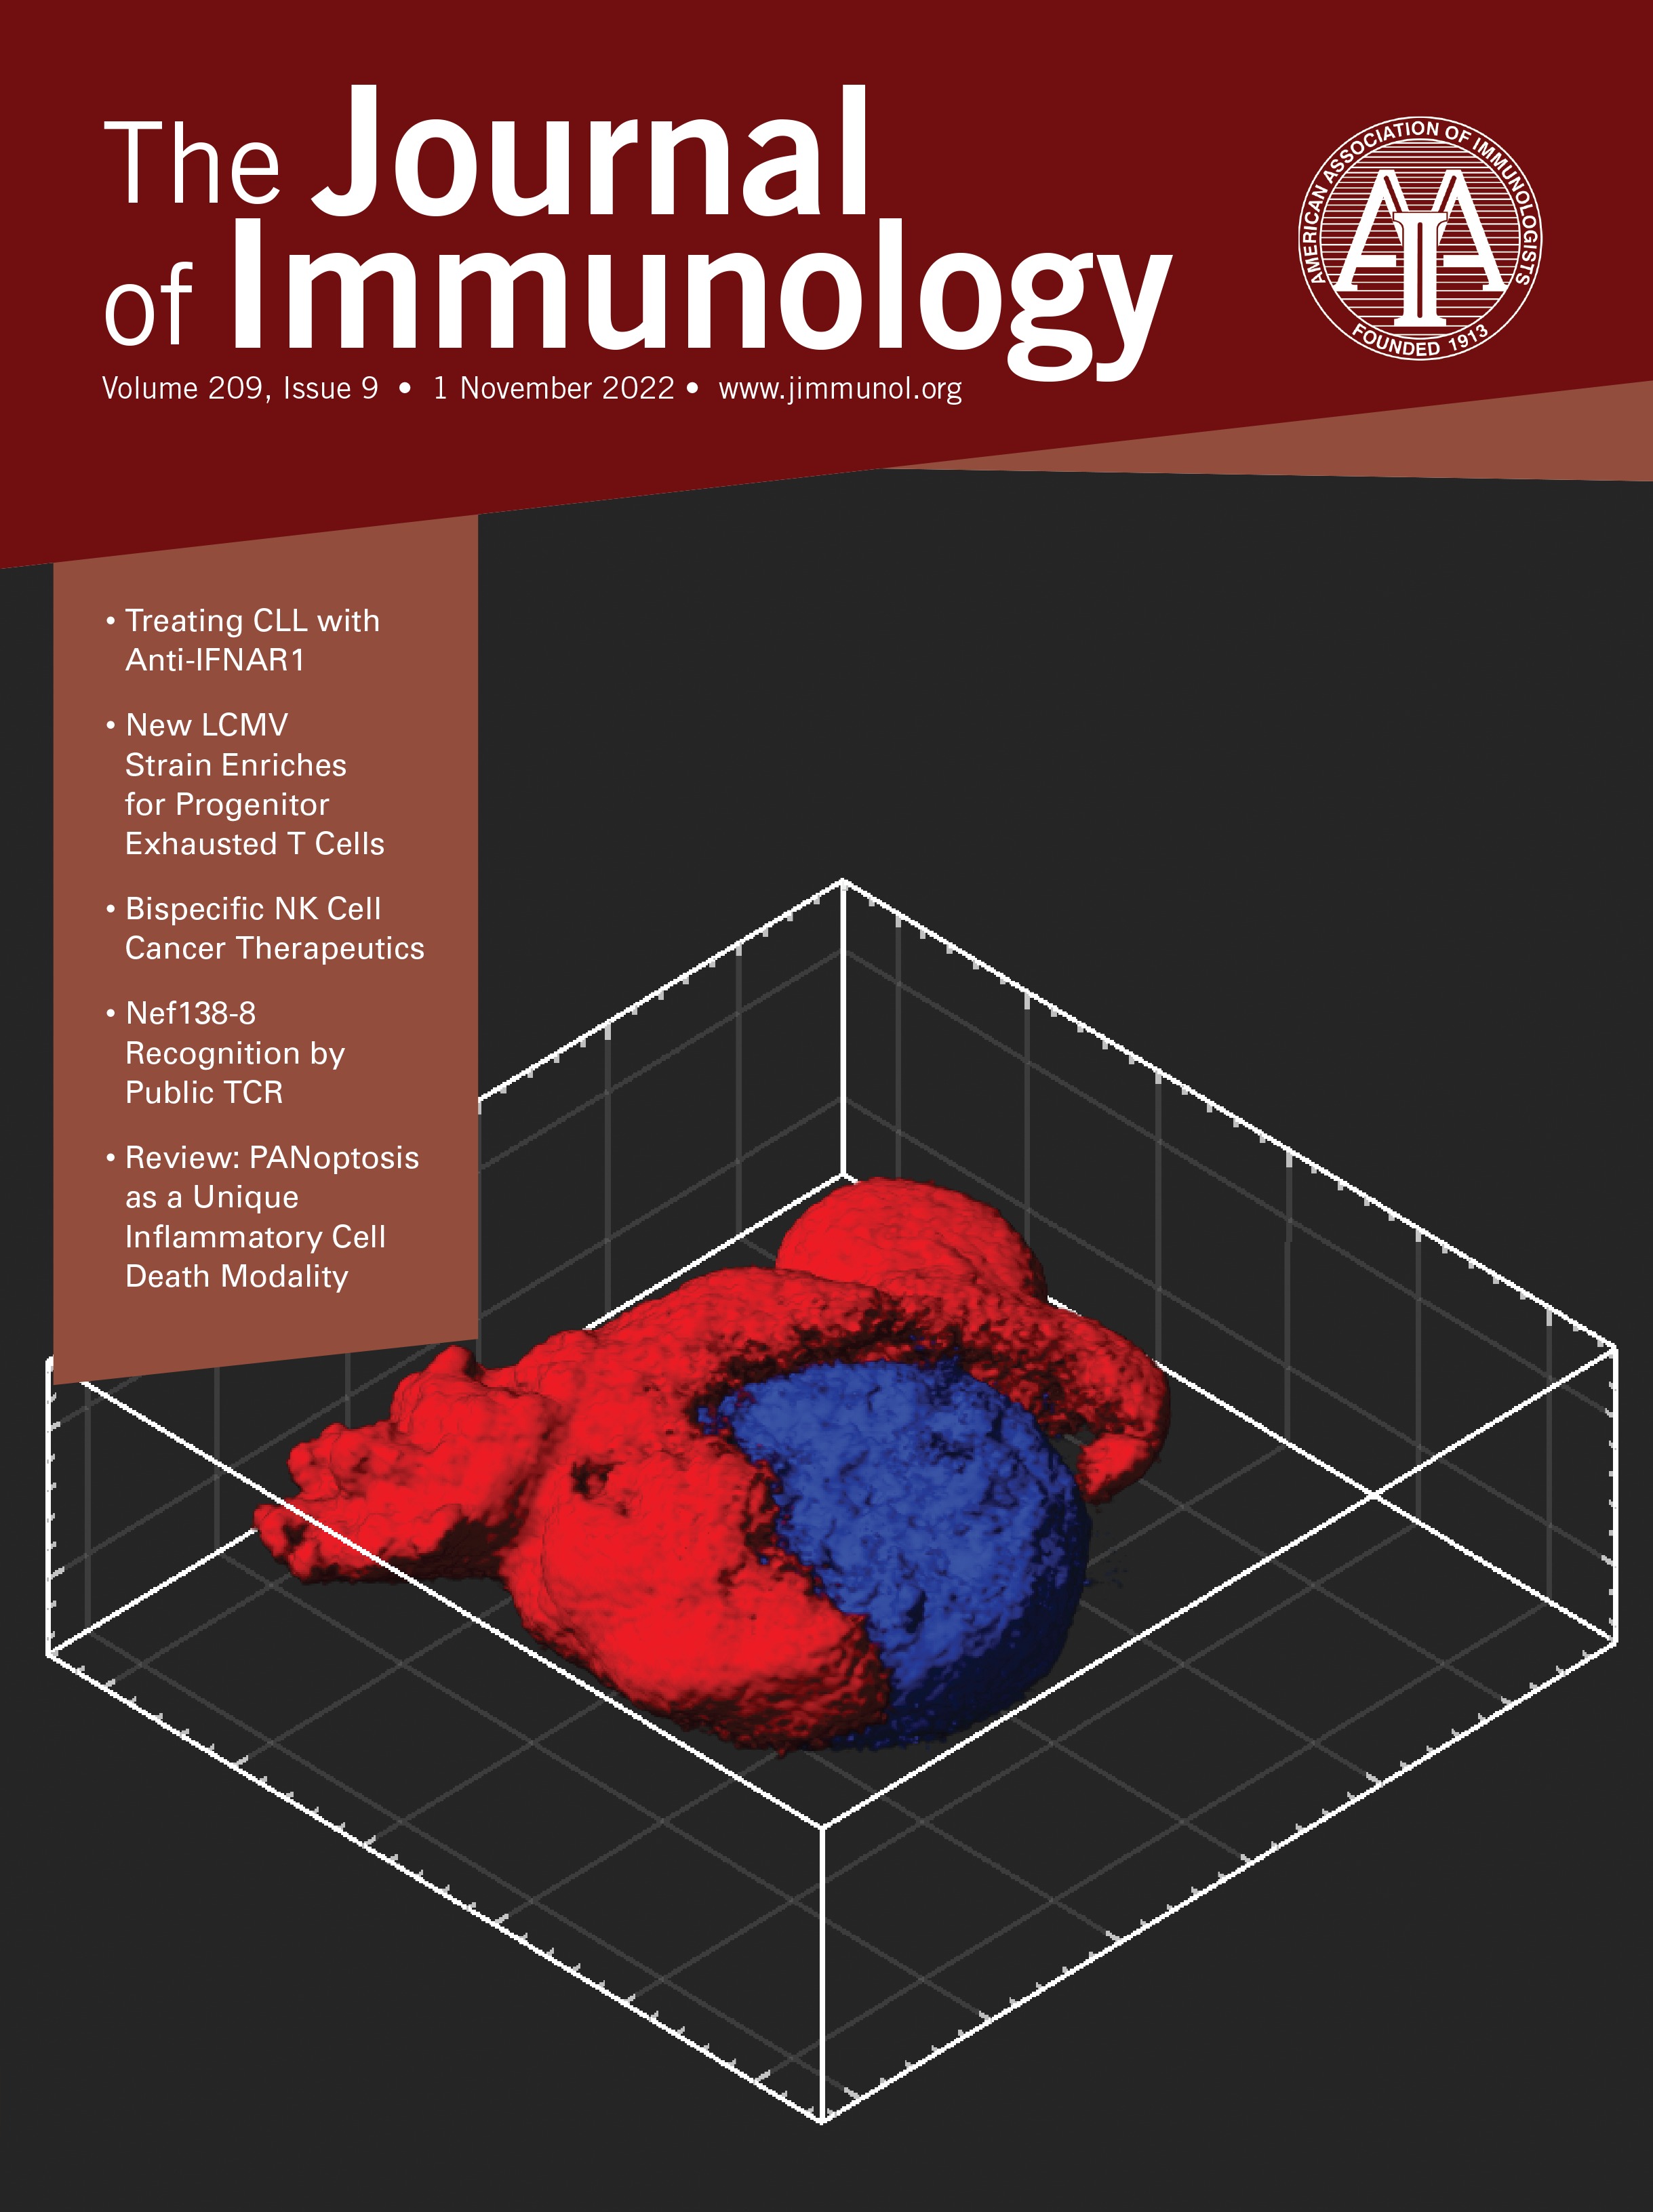 Persistent Antigen Harbored by Alveolar Macrophages Enhances the Maintenance of Lung-Resident Memory CD8+ T Cells [MUCOSAL IMMUNOLOGY]